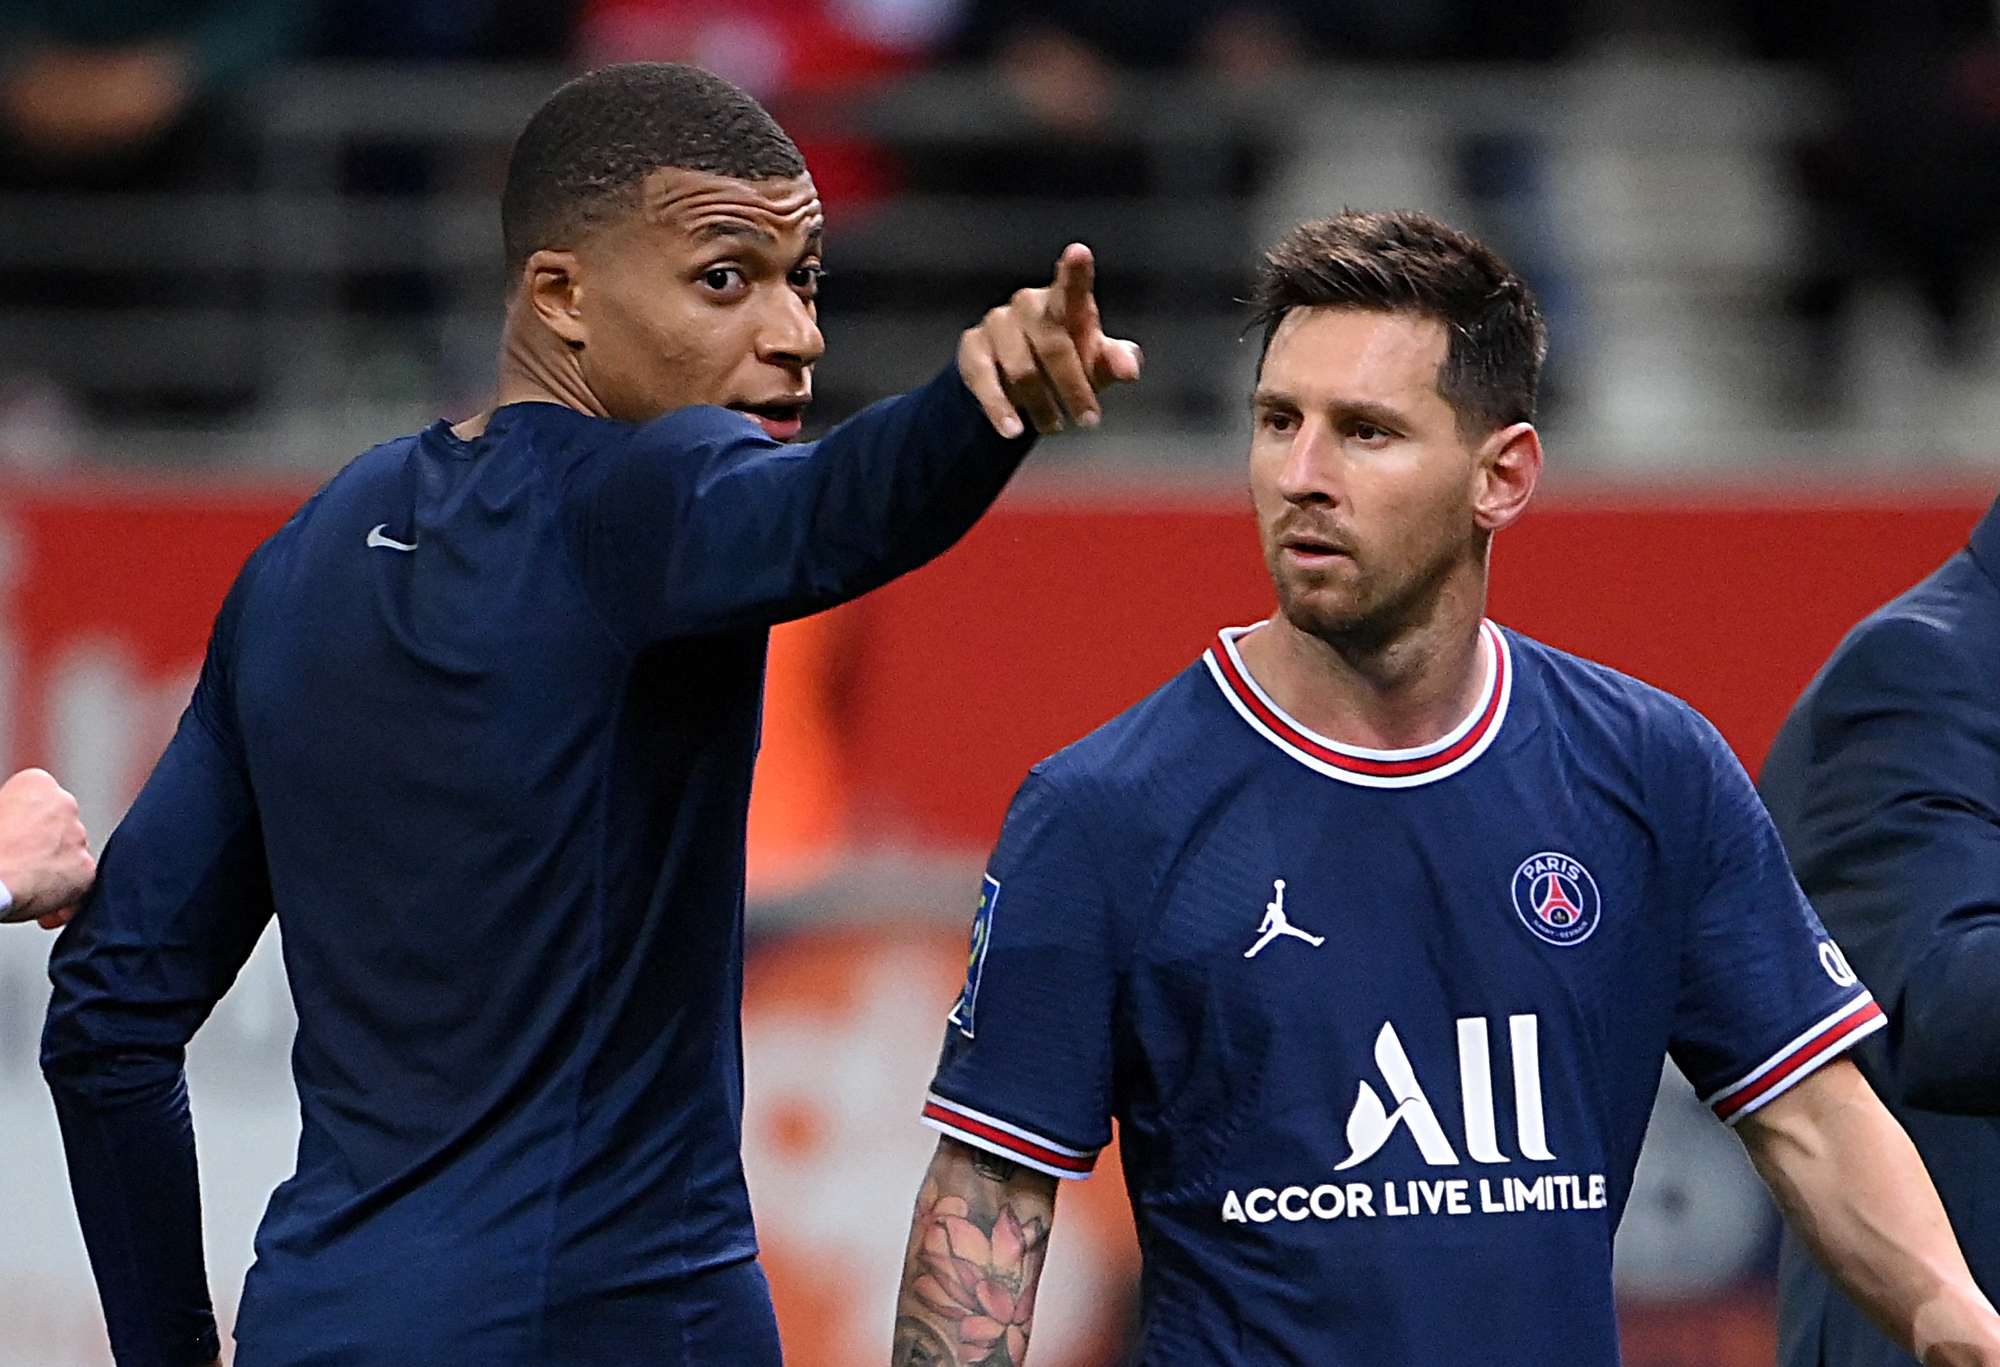 Kylian Mbappe & Lionel Messi